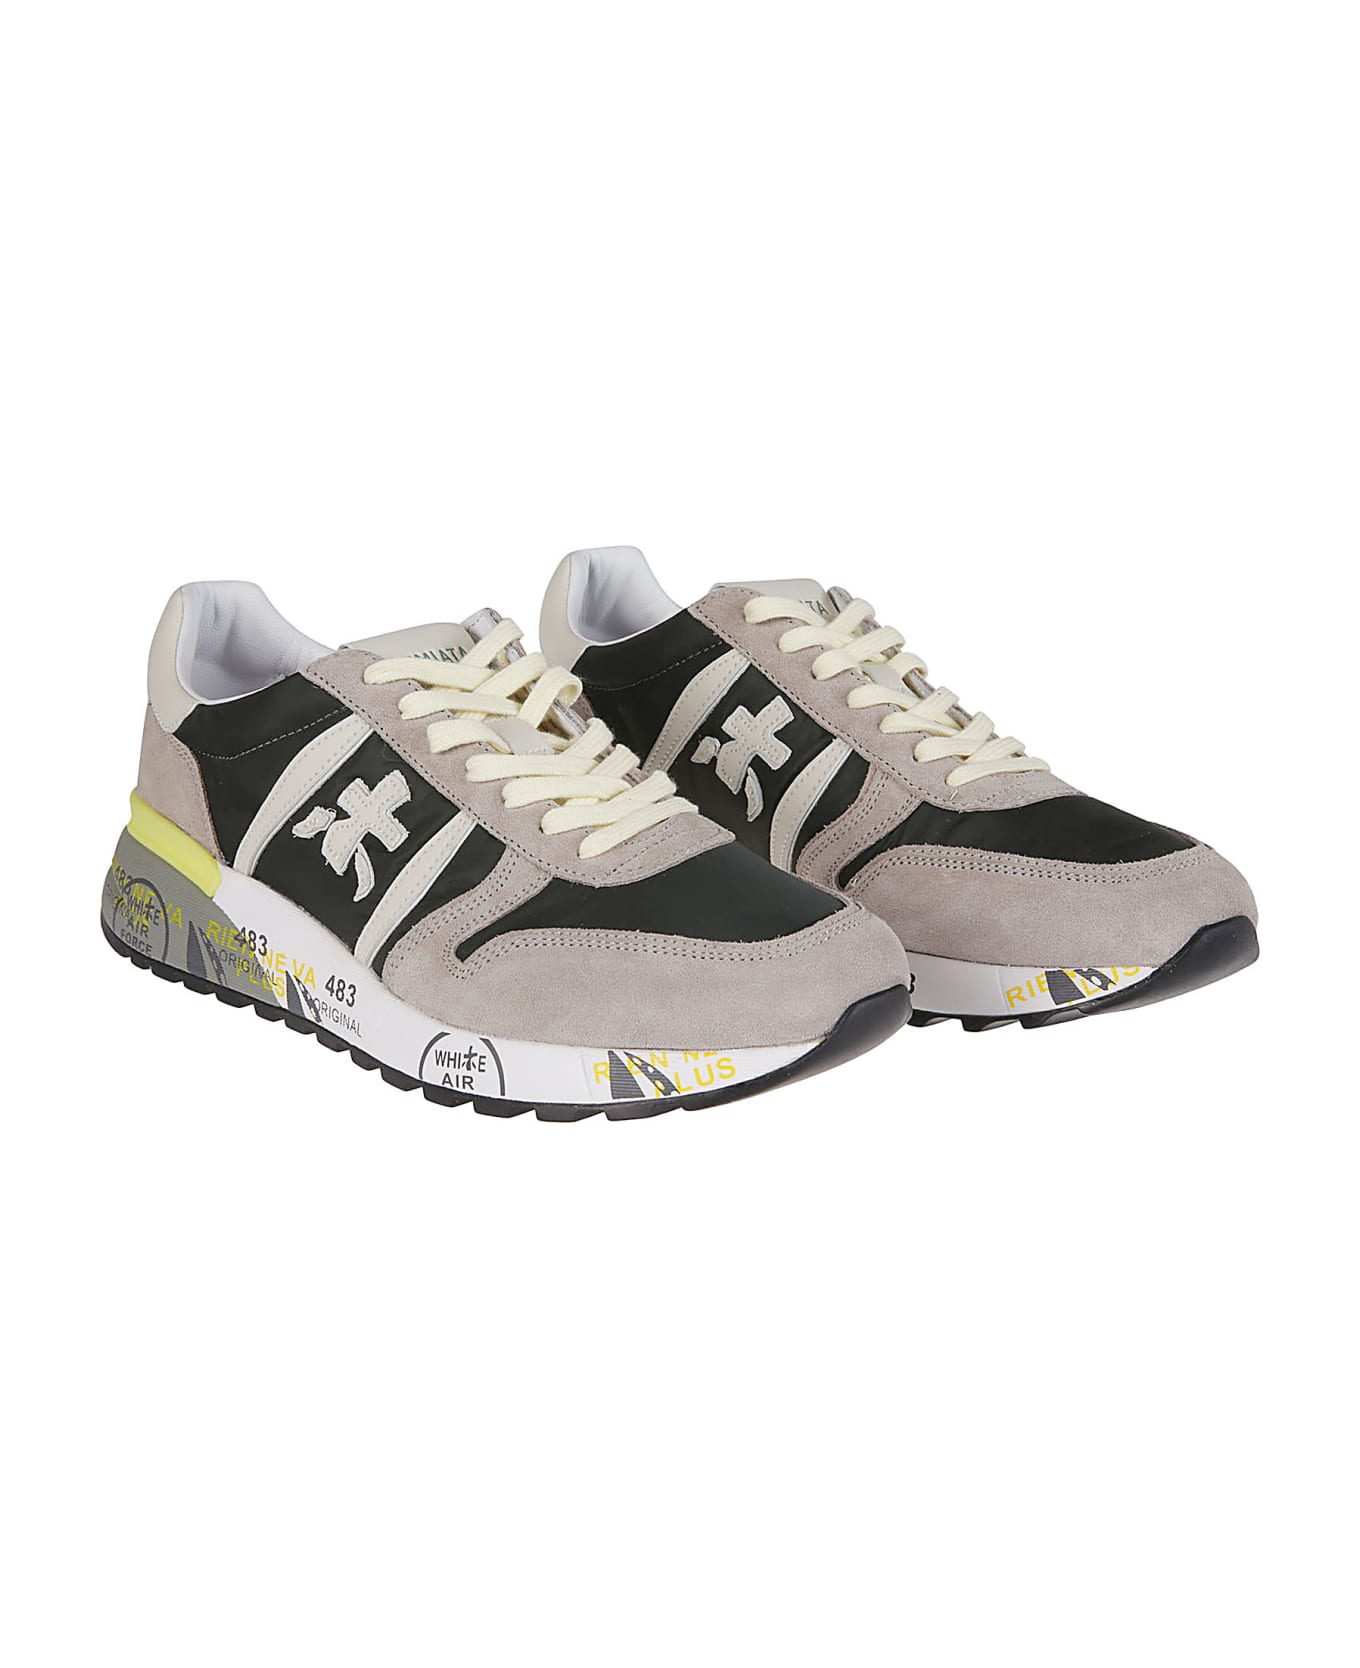 Premiata Sneakers In Suede And Nylon - Green